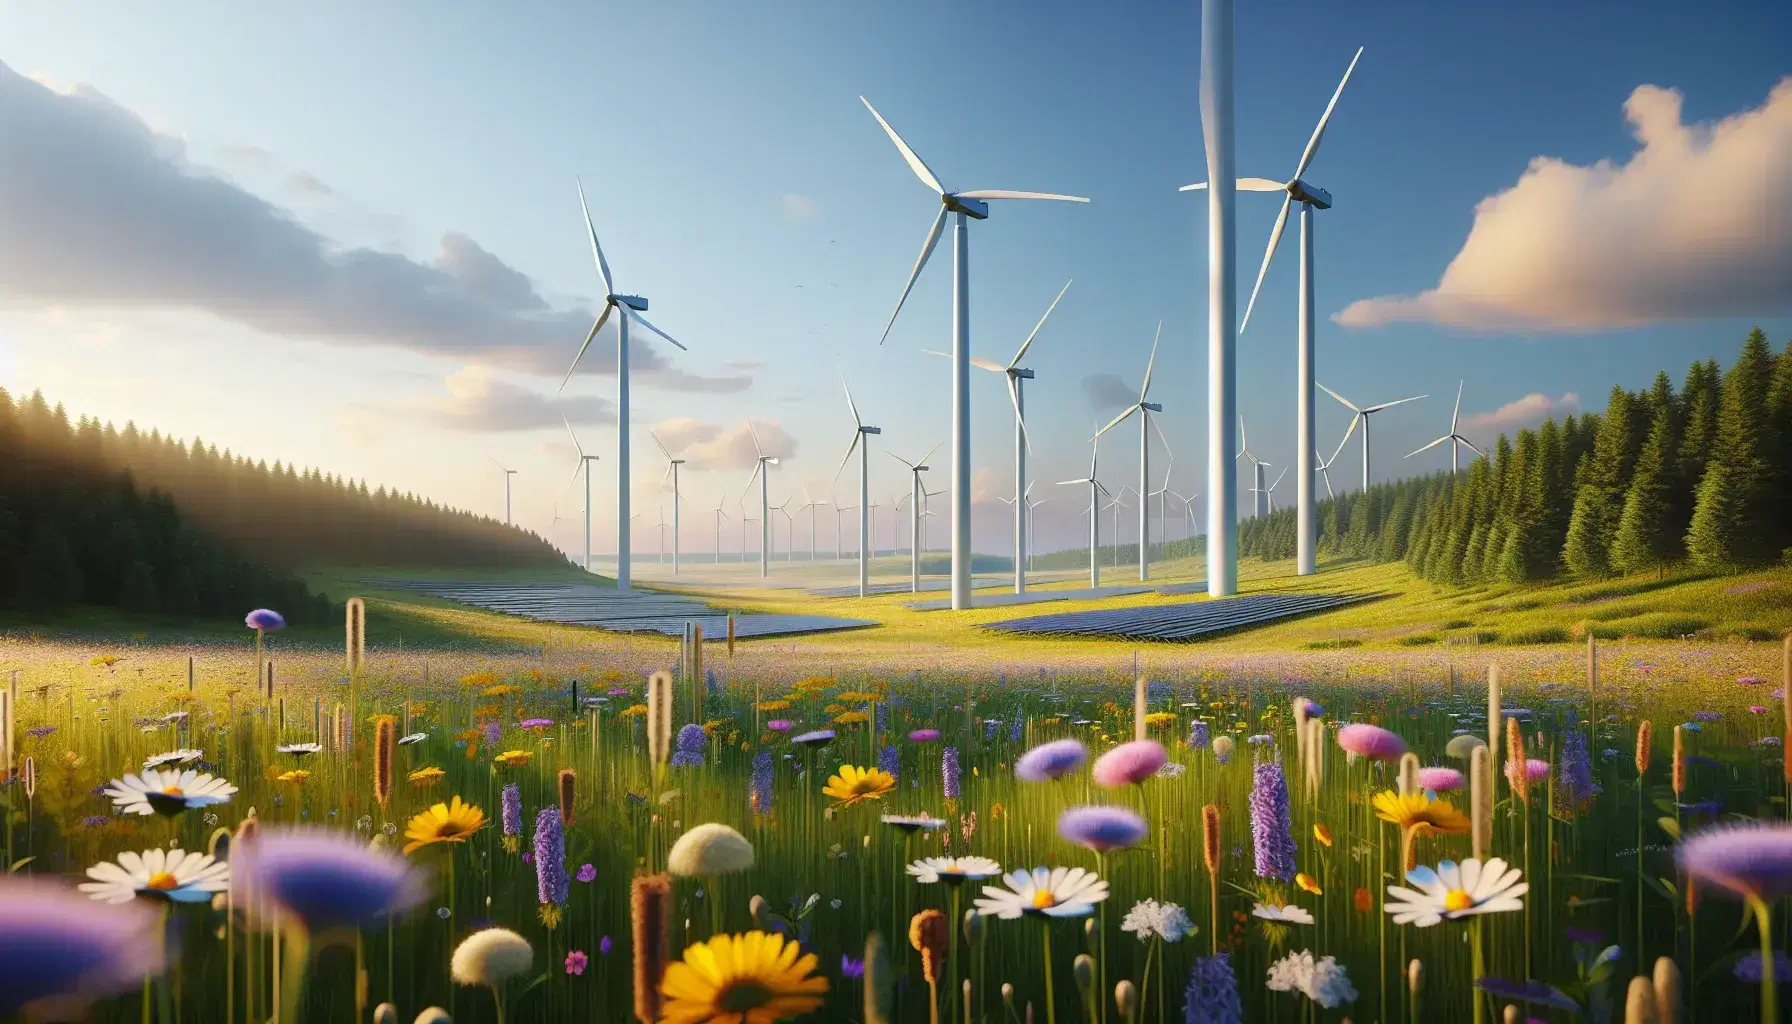 Landscape with wind farm, white turbines moving on green field with wild flowers, blue sky and solar panels.